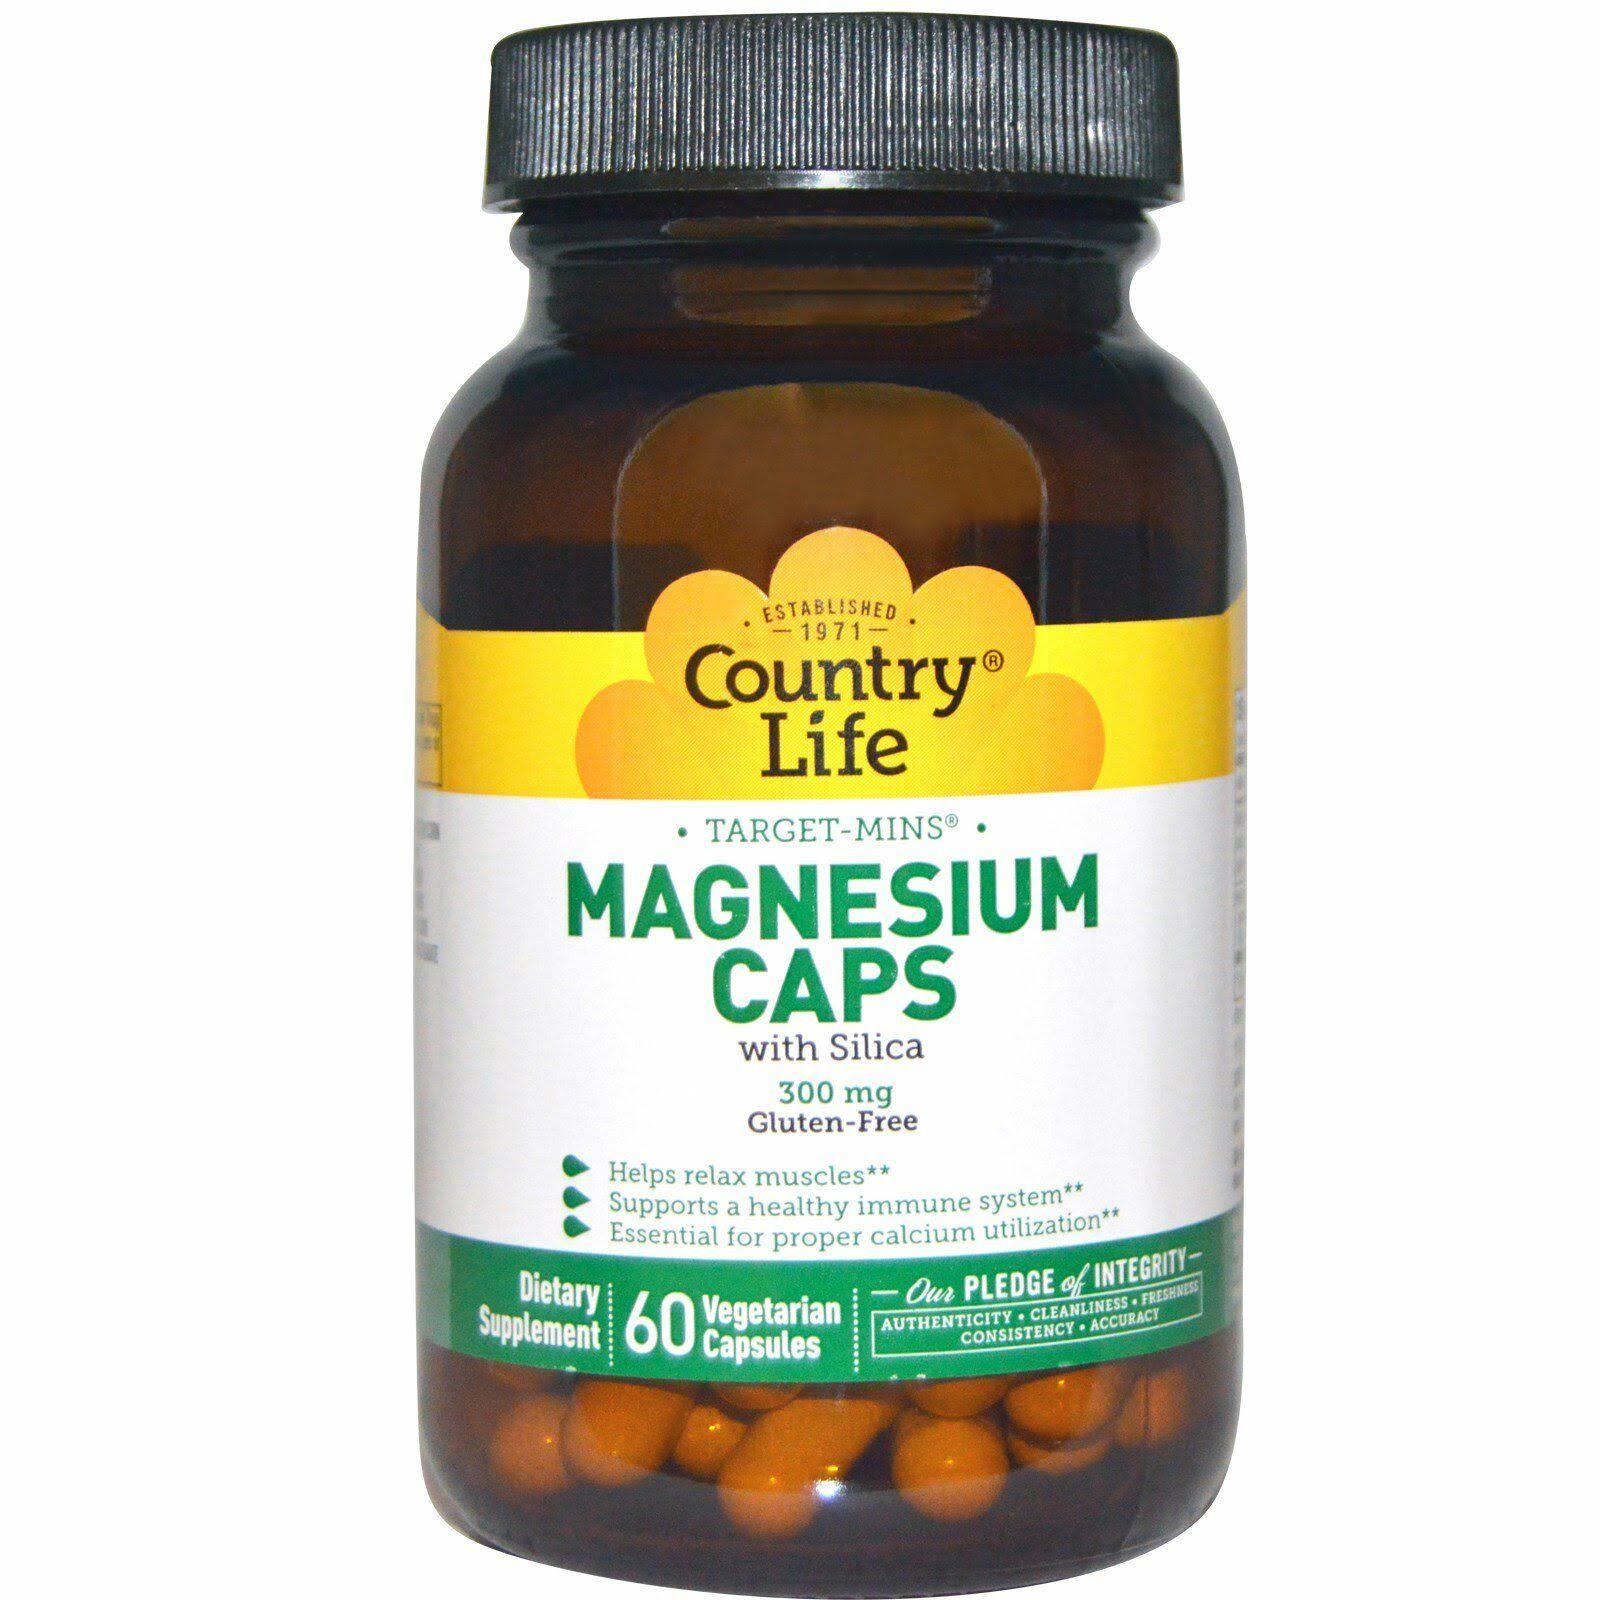 Country Life Magnesium Caps with Silica